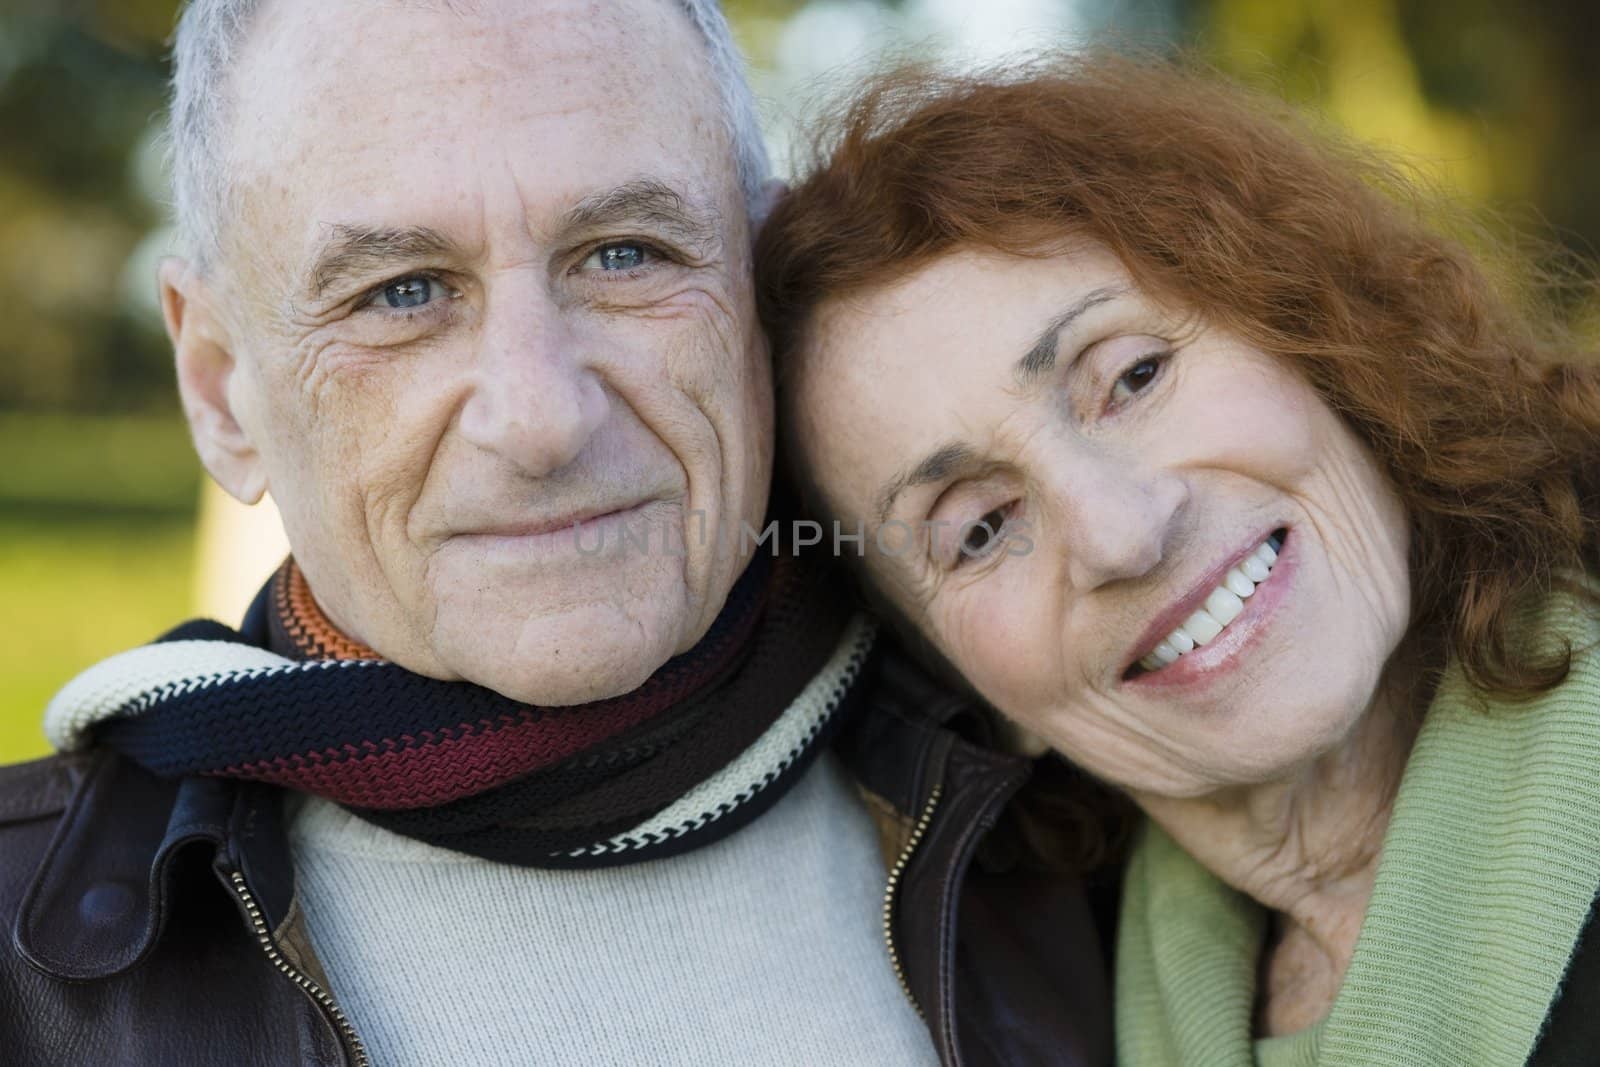 Portrait of Two Happy Seniors Leaning on Each Other